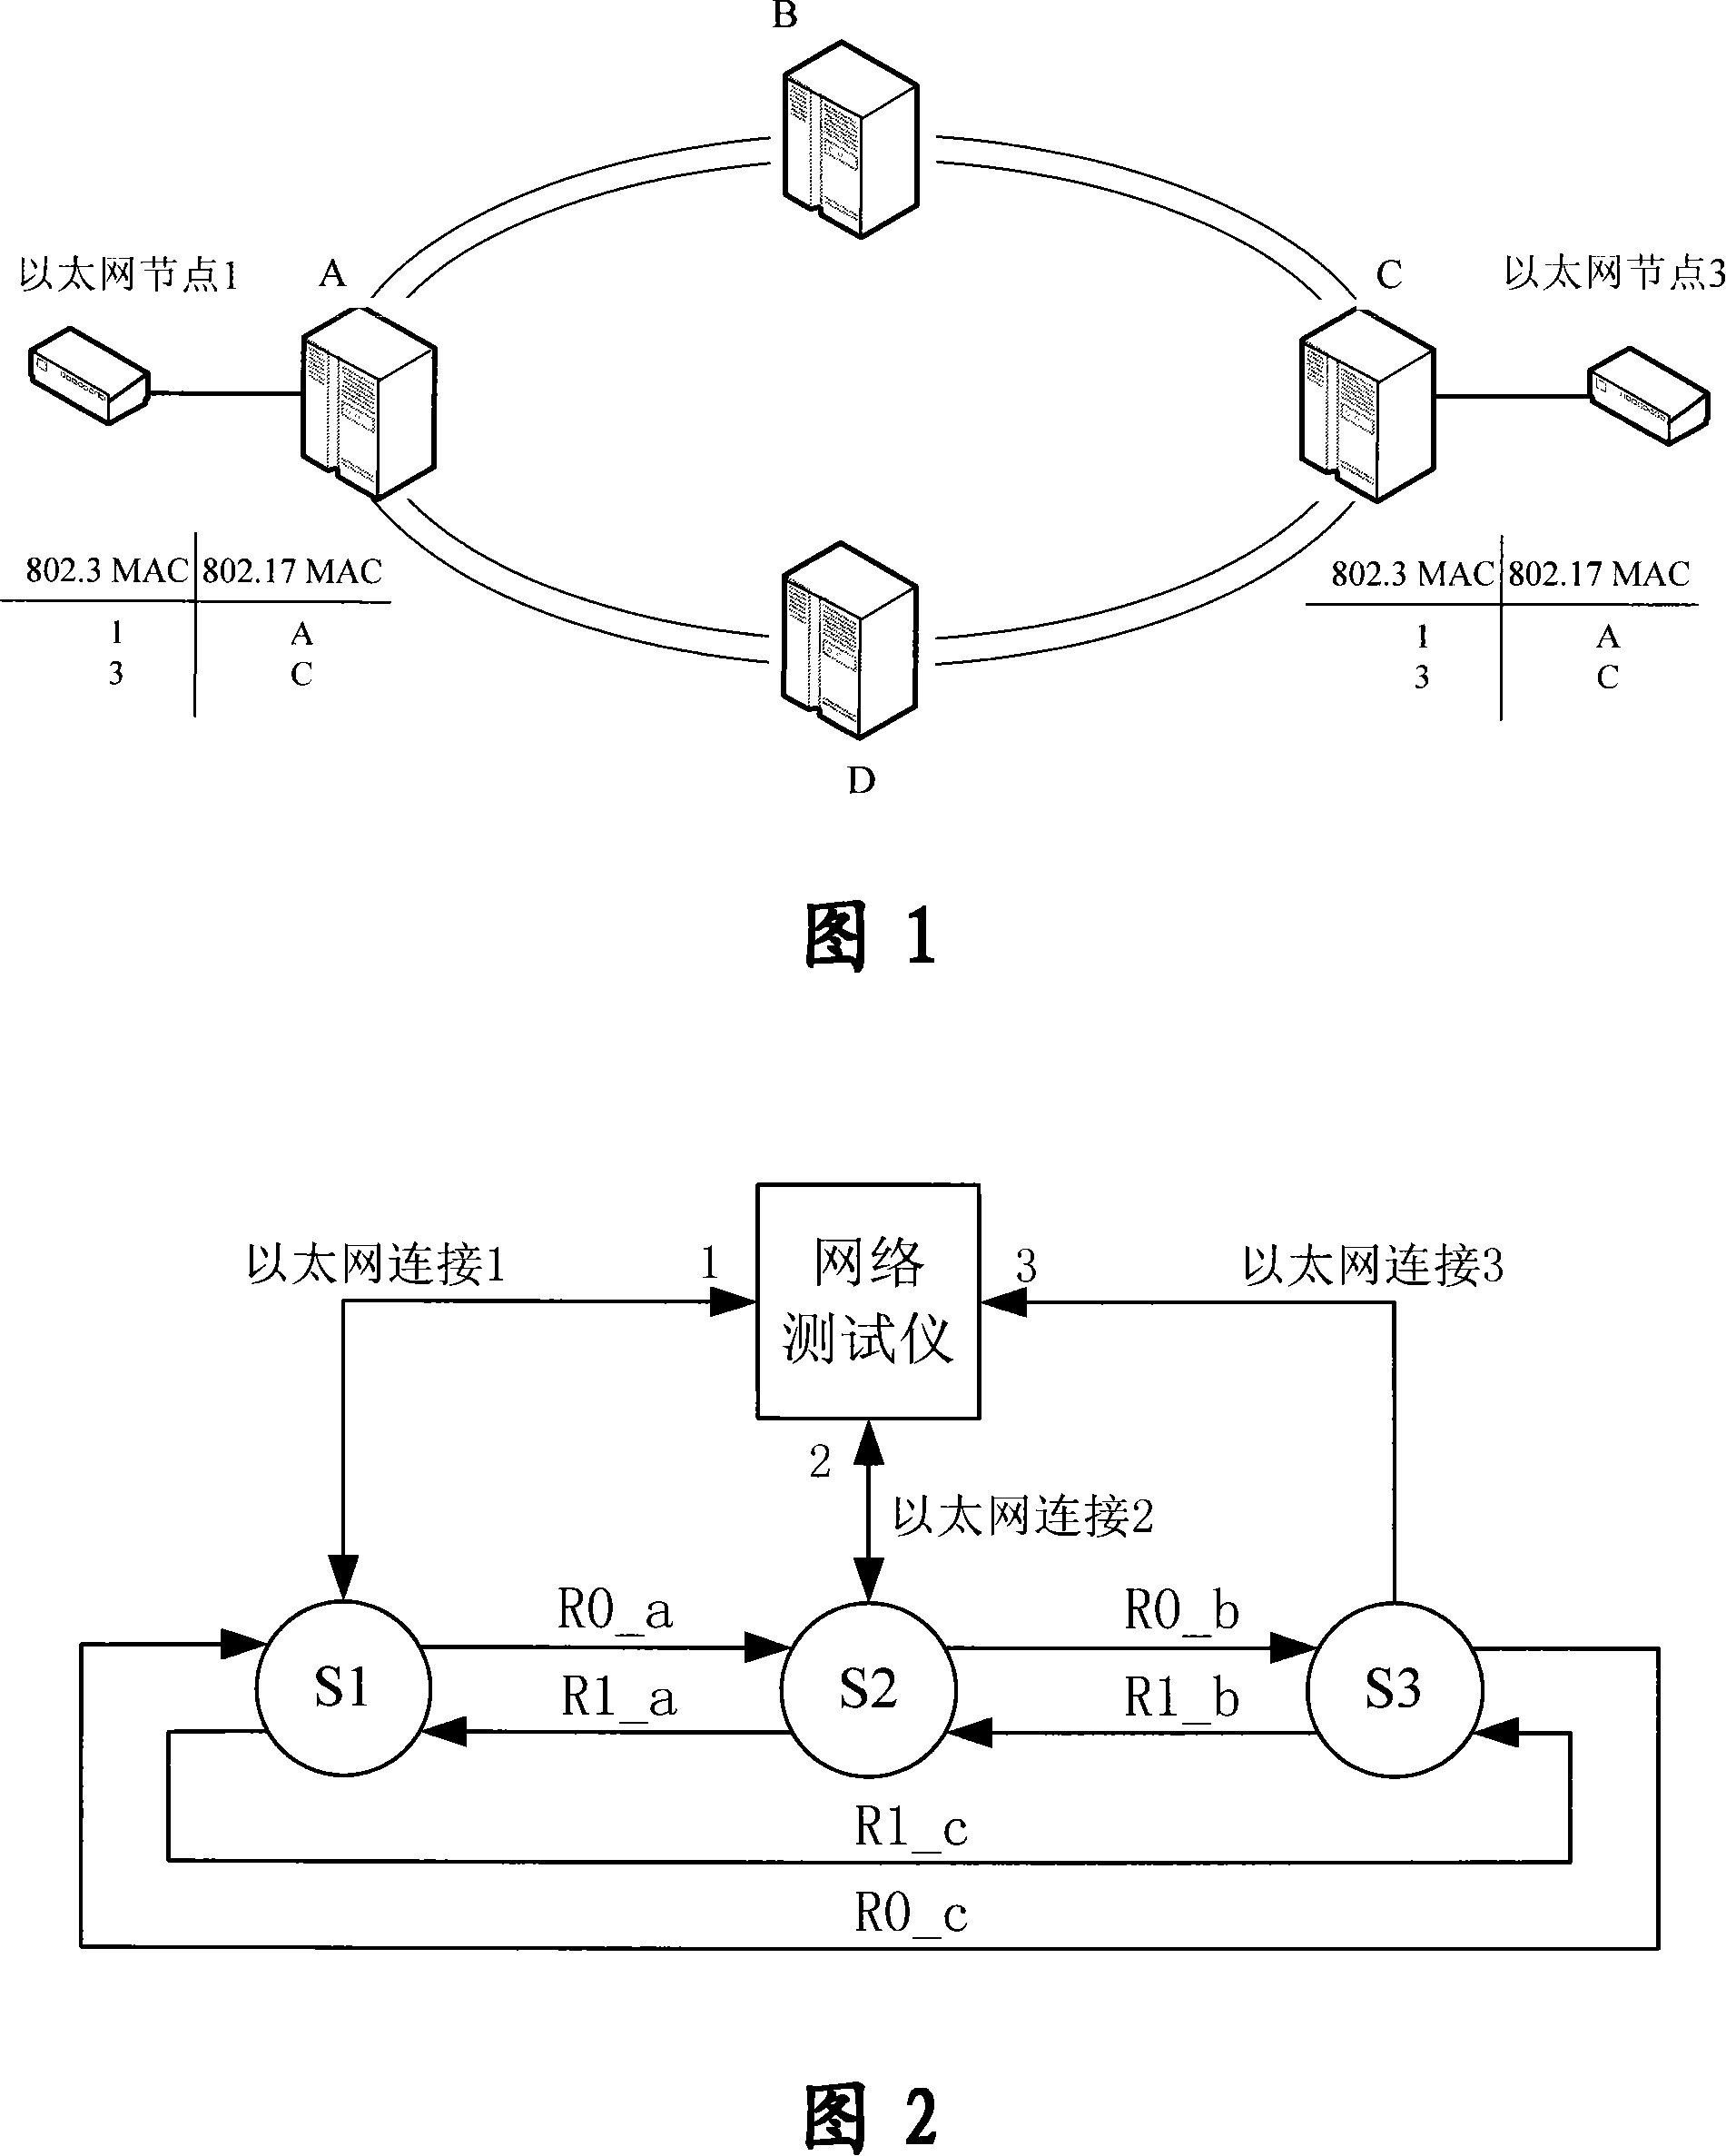 Method for testing aging time of medium accessing into control address table